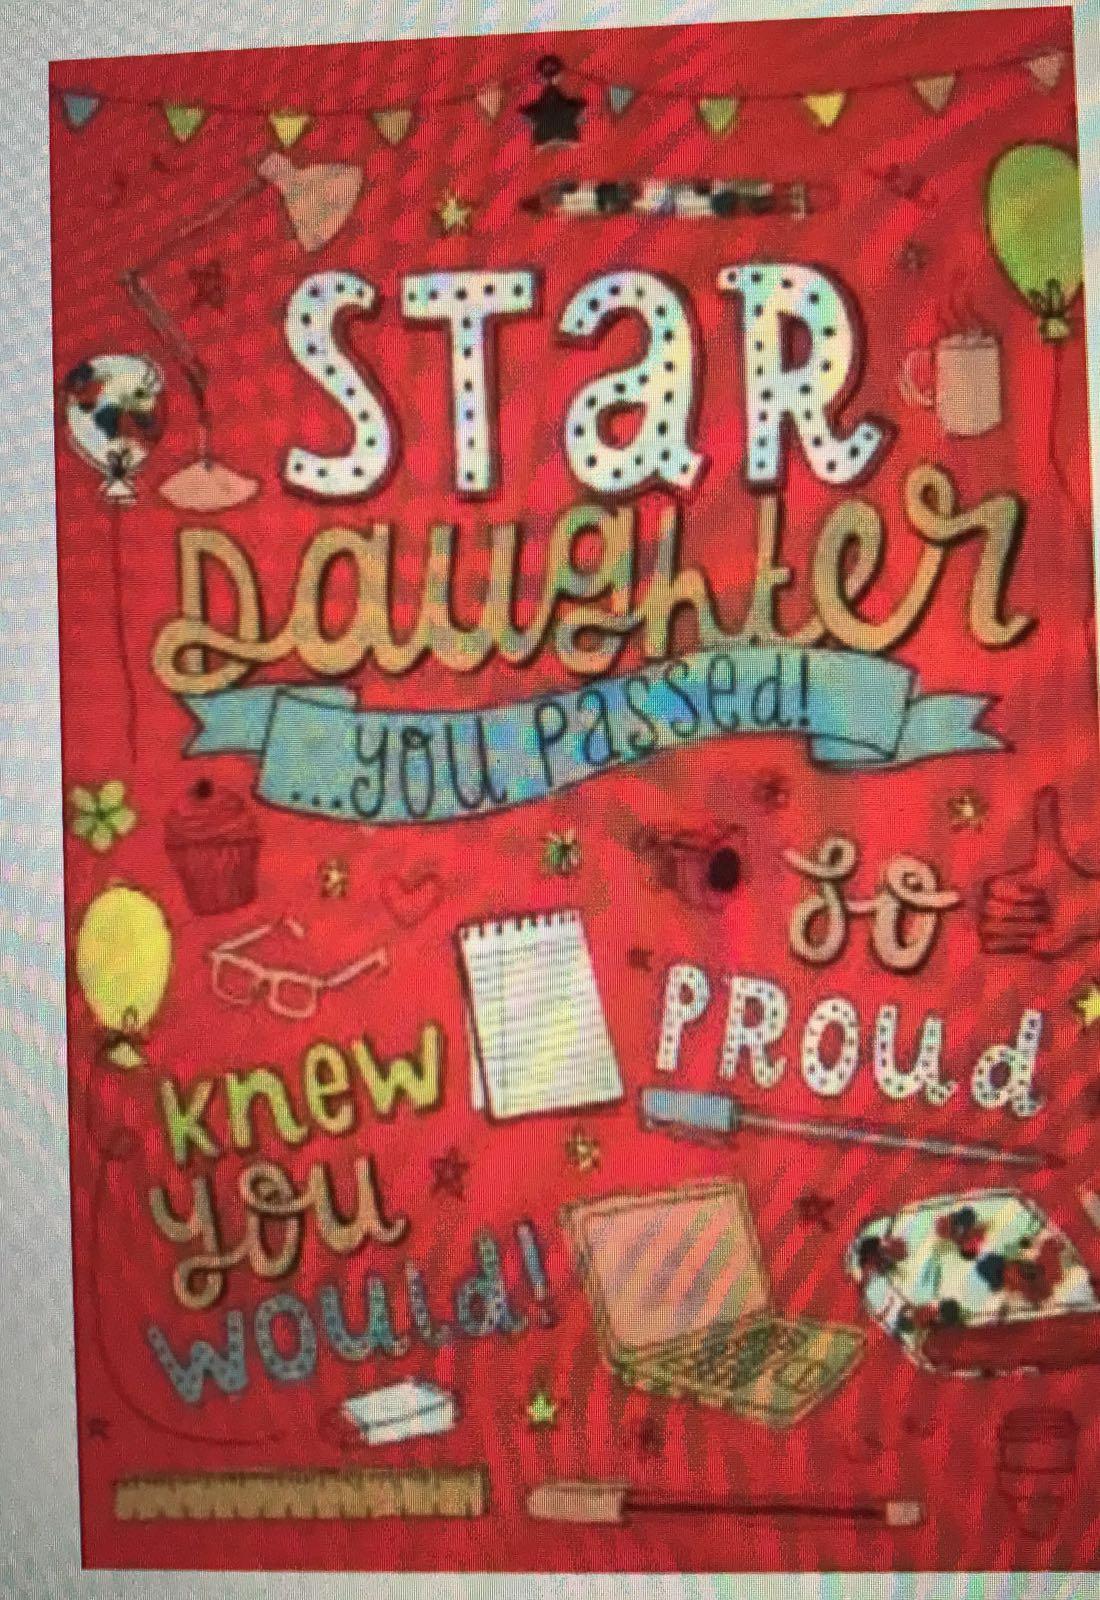 Star Daughter You Passed, Back to School Card 